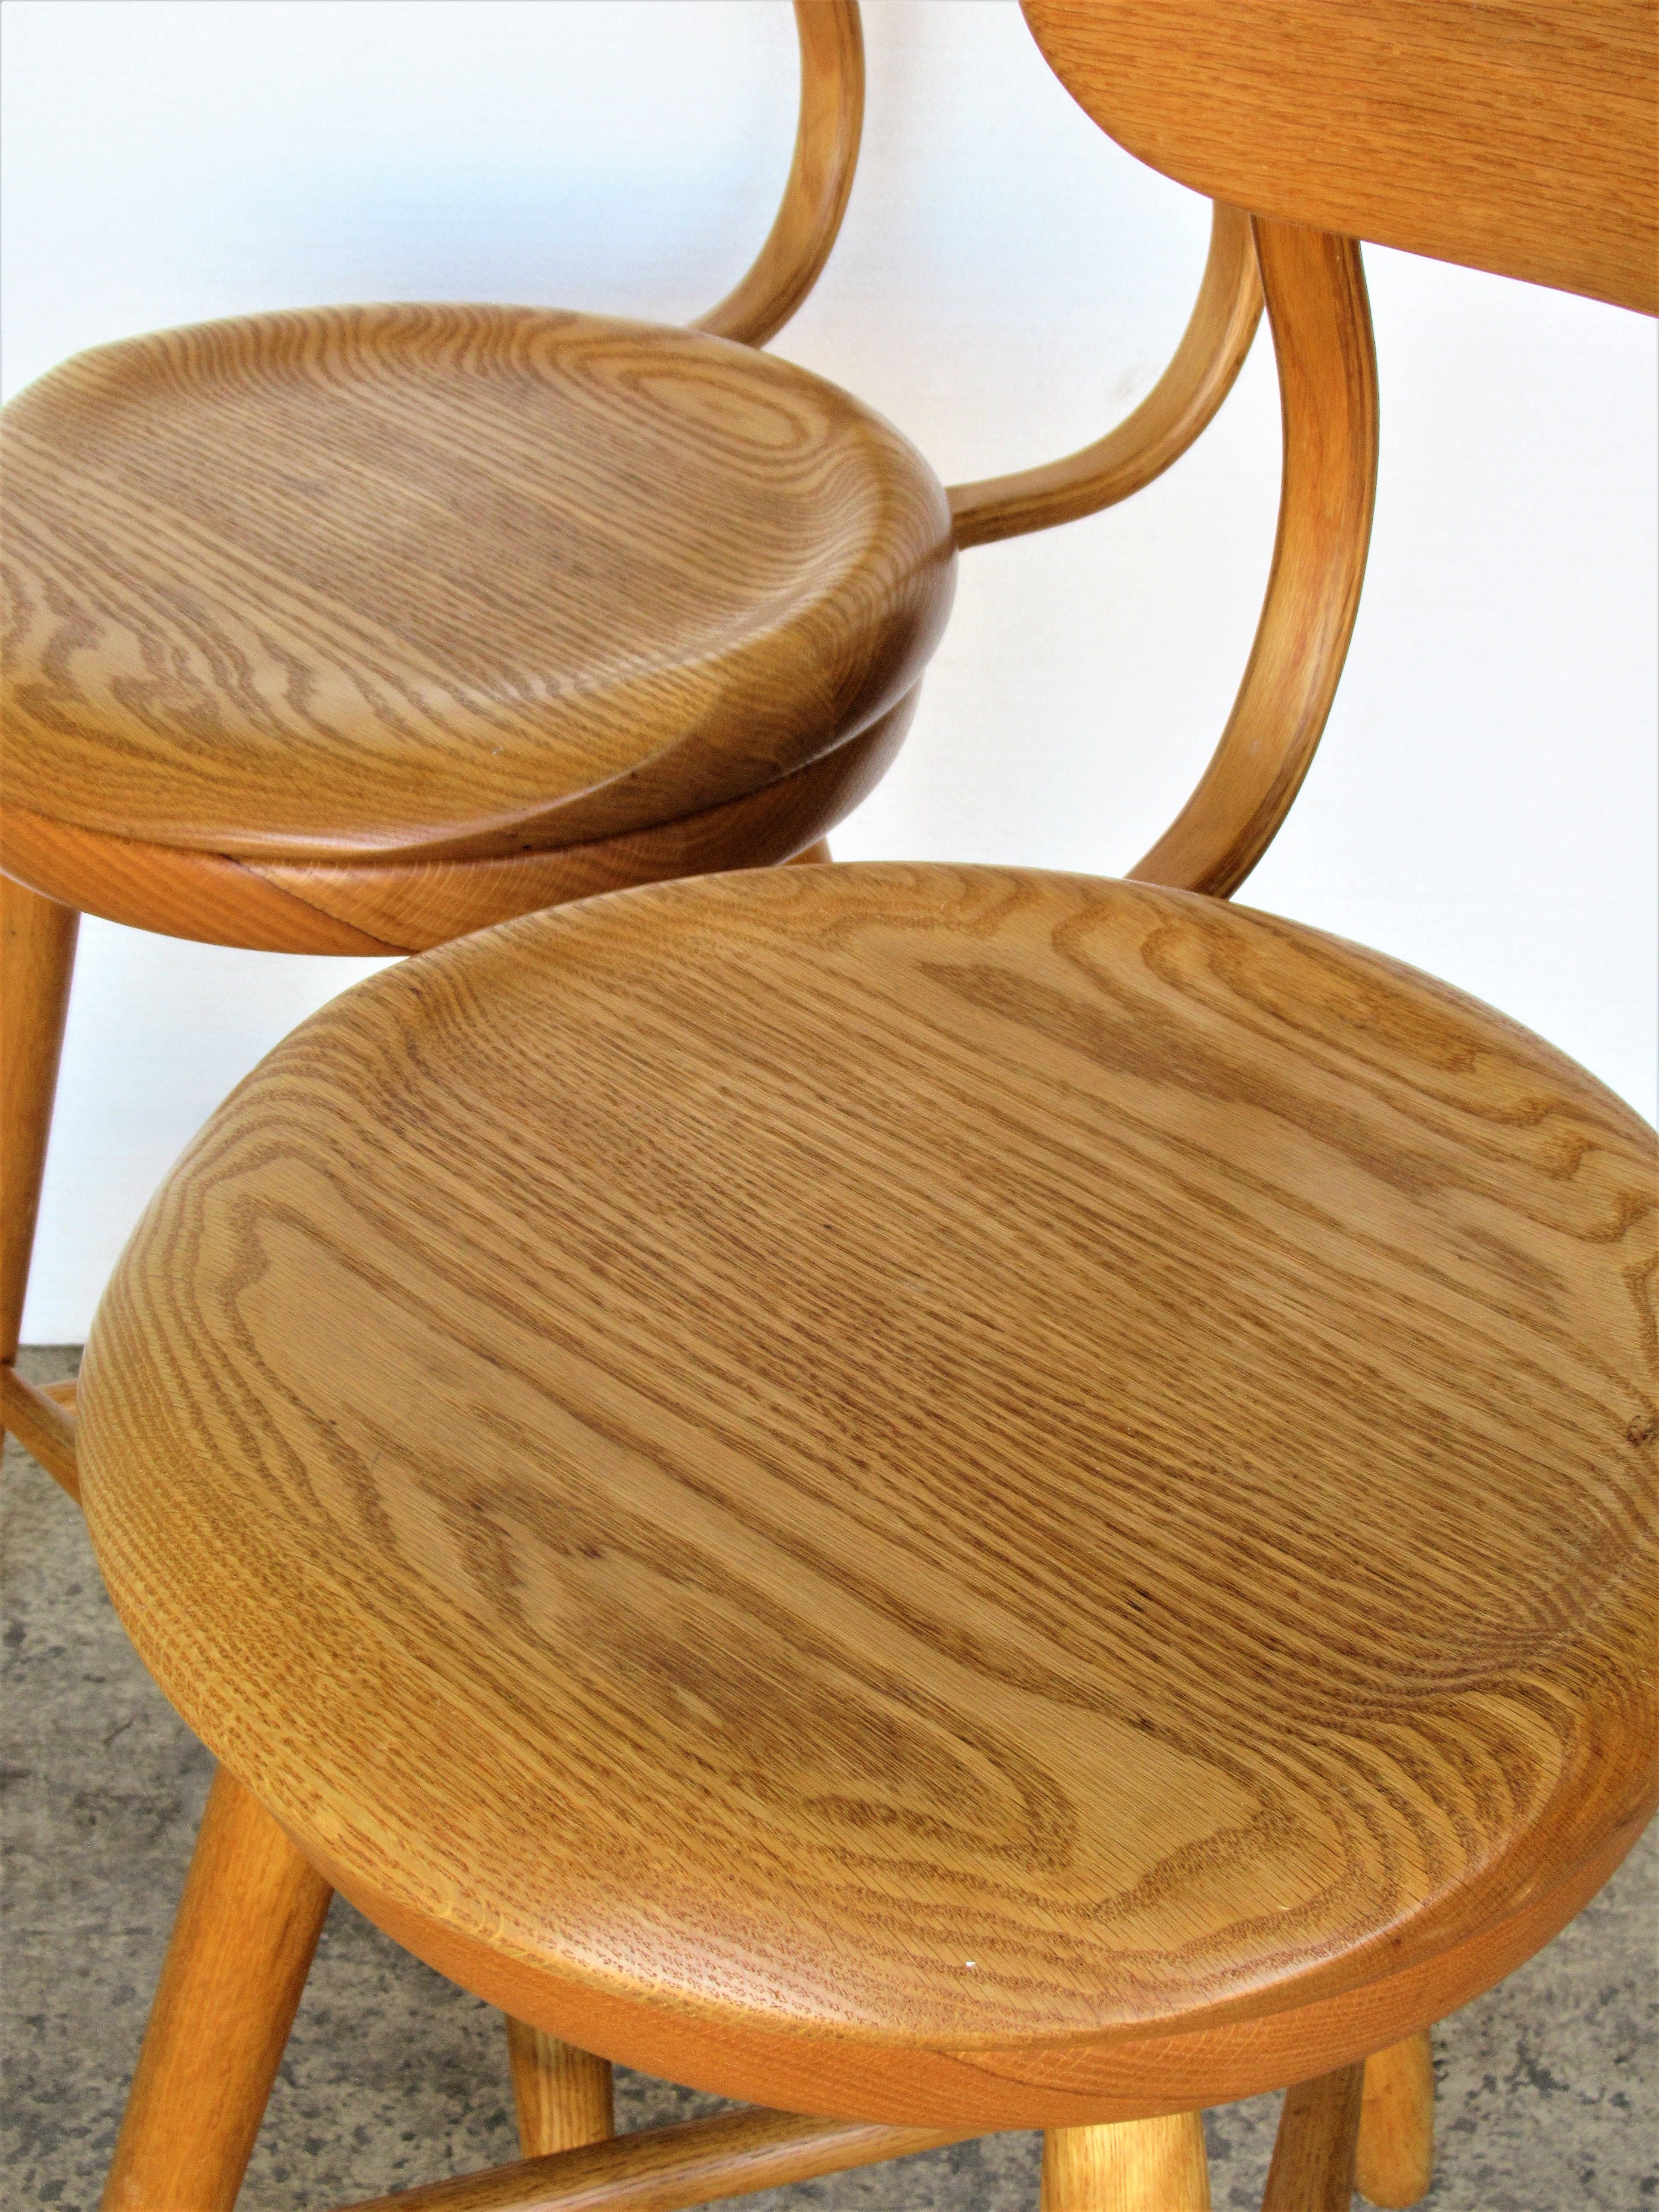 Swivel Seat Stools by Kai Pedersen Woodworking Studio, USA, 1980 In Good Condition For Sale In Rochester, NY